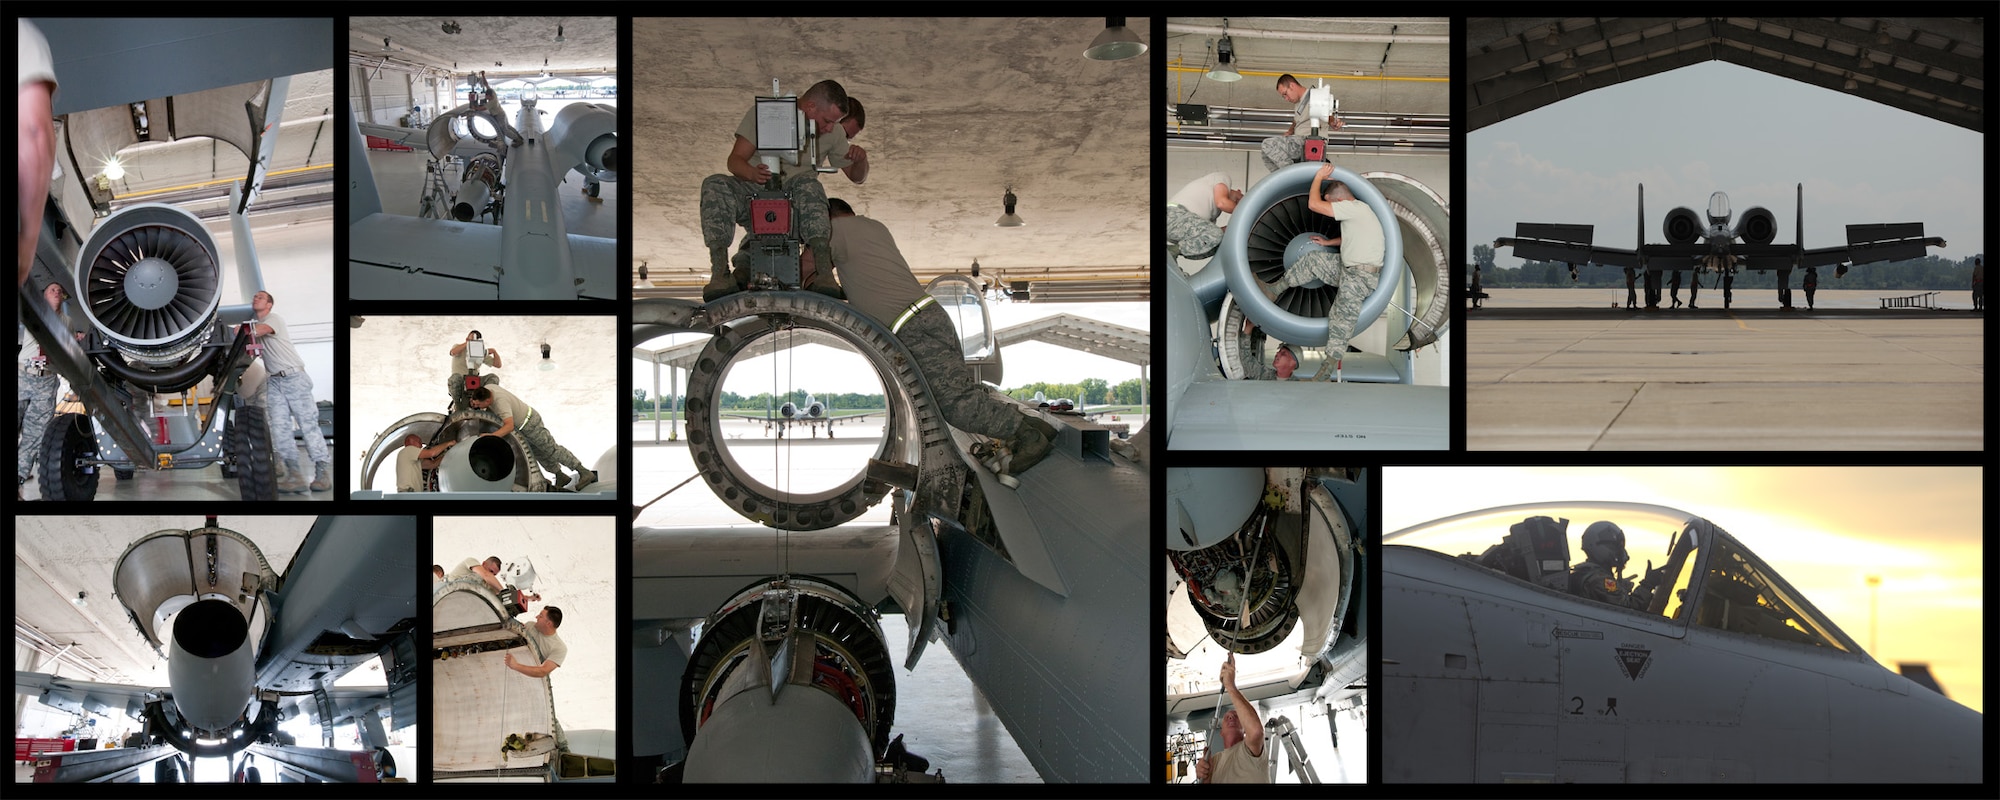 PHOTO OF THE YEAR: This composite photo of photos taken by Technical Sgt. Robert Hanet, highlight the work of Airmen from the 127th Maintenance Group as they change an engine in an A-10 Thunderbolt II as part of a routine, scheduled maintenance operation, Sept. 16, 2012. The photo composite was one of the finalists for the title of 2012 Photo of the Year at Selfridge Air National Guard Base, Mich. (Air National Guard photo illustration by TSgt. Robert Hanet)